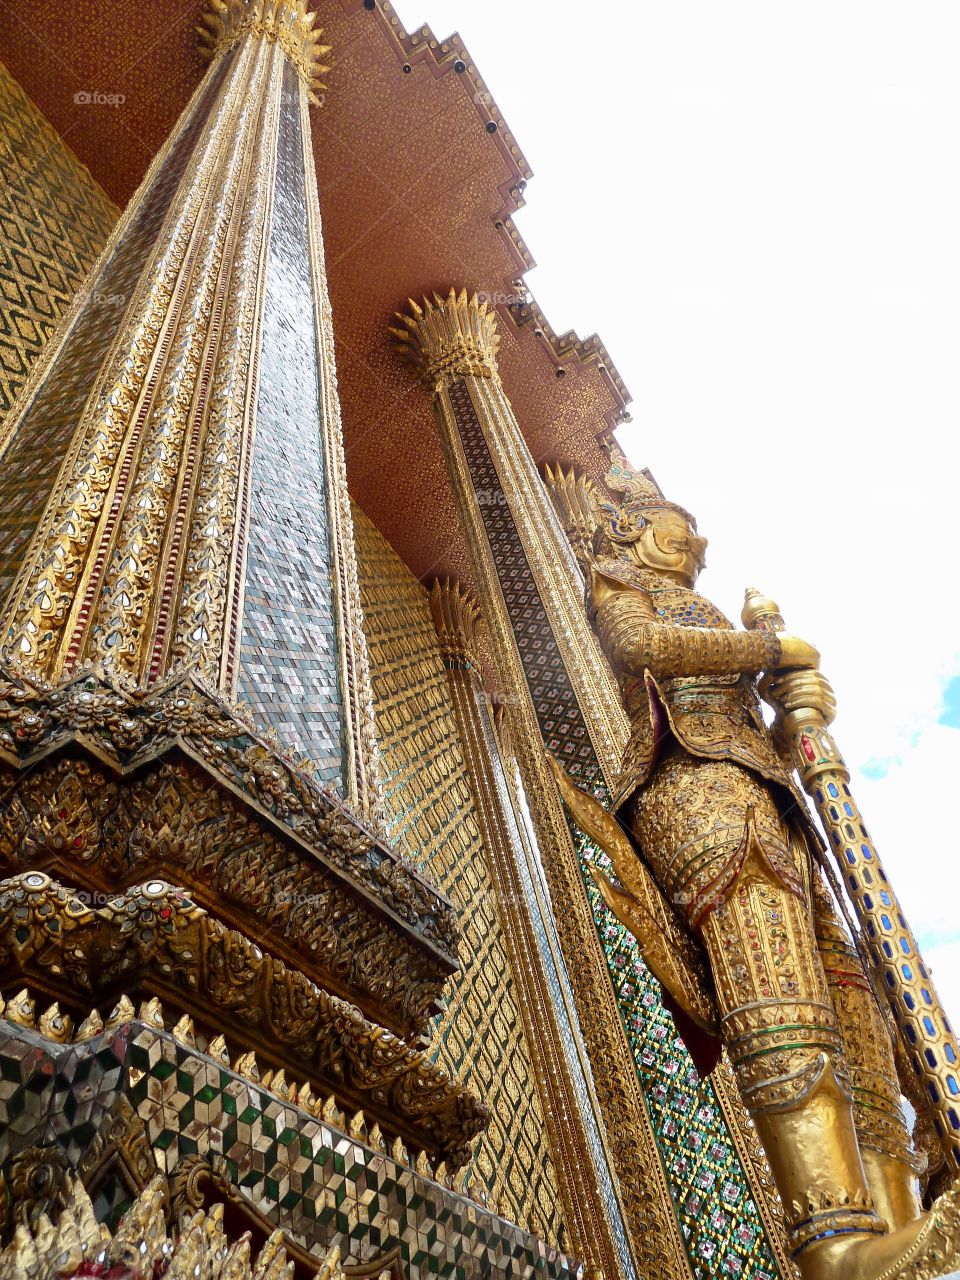 A olden giant watches over the Temple of the Emerald Buddha